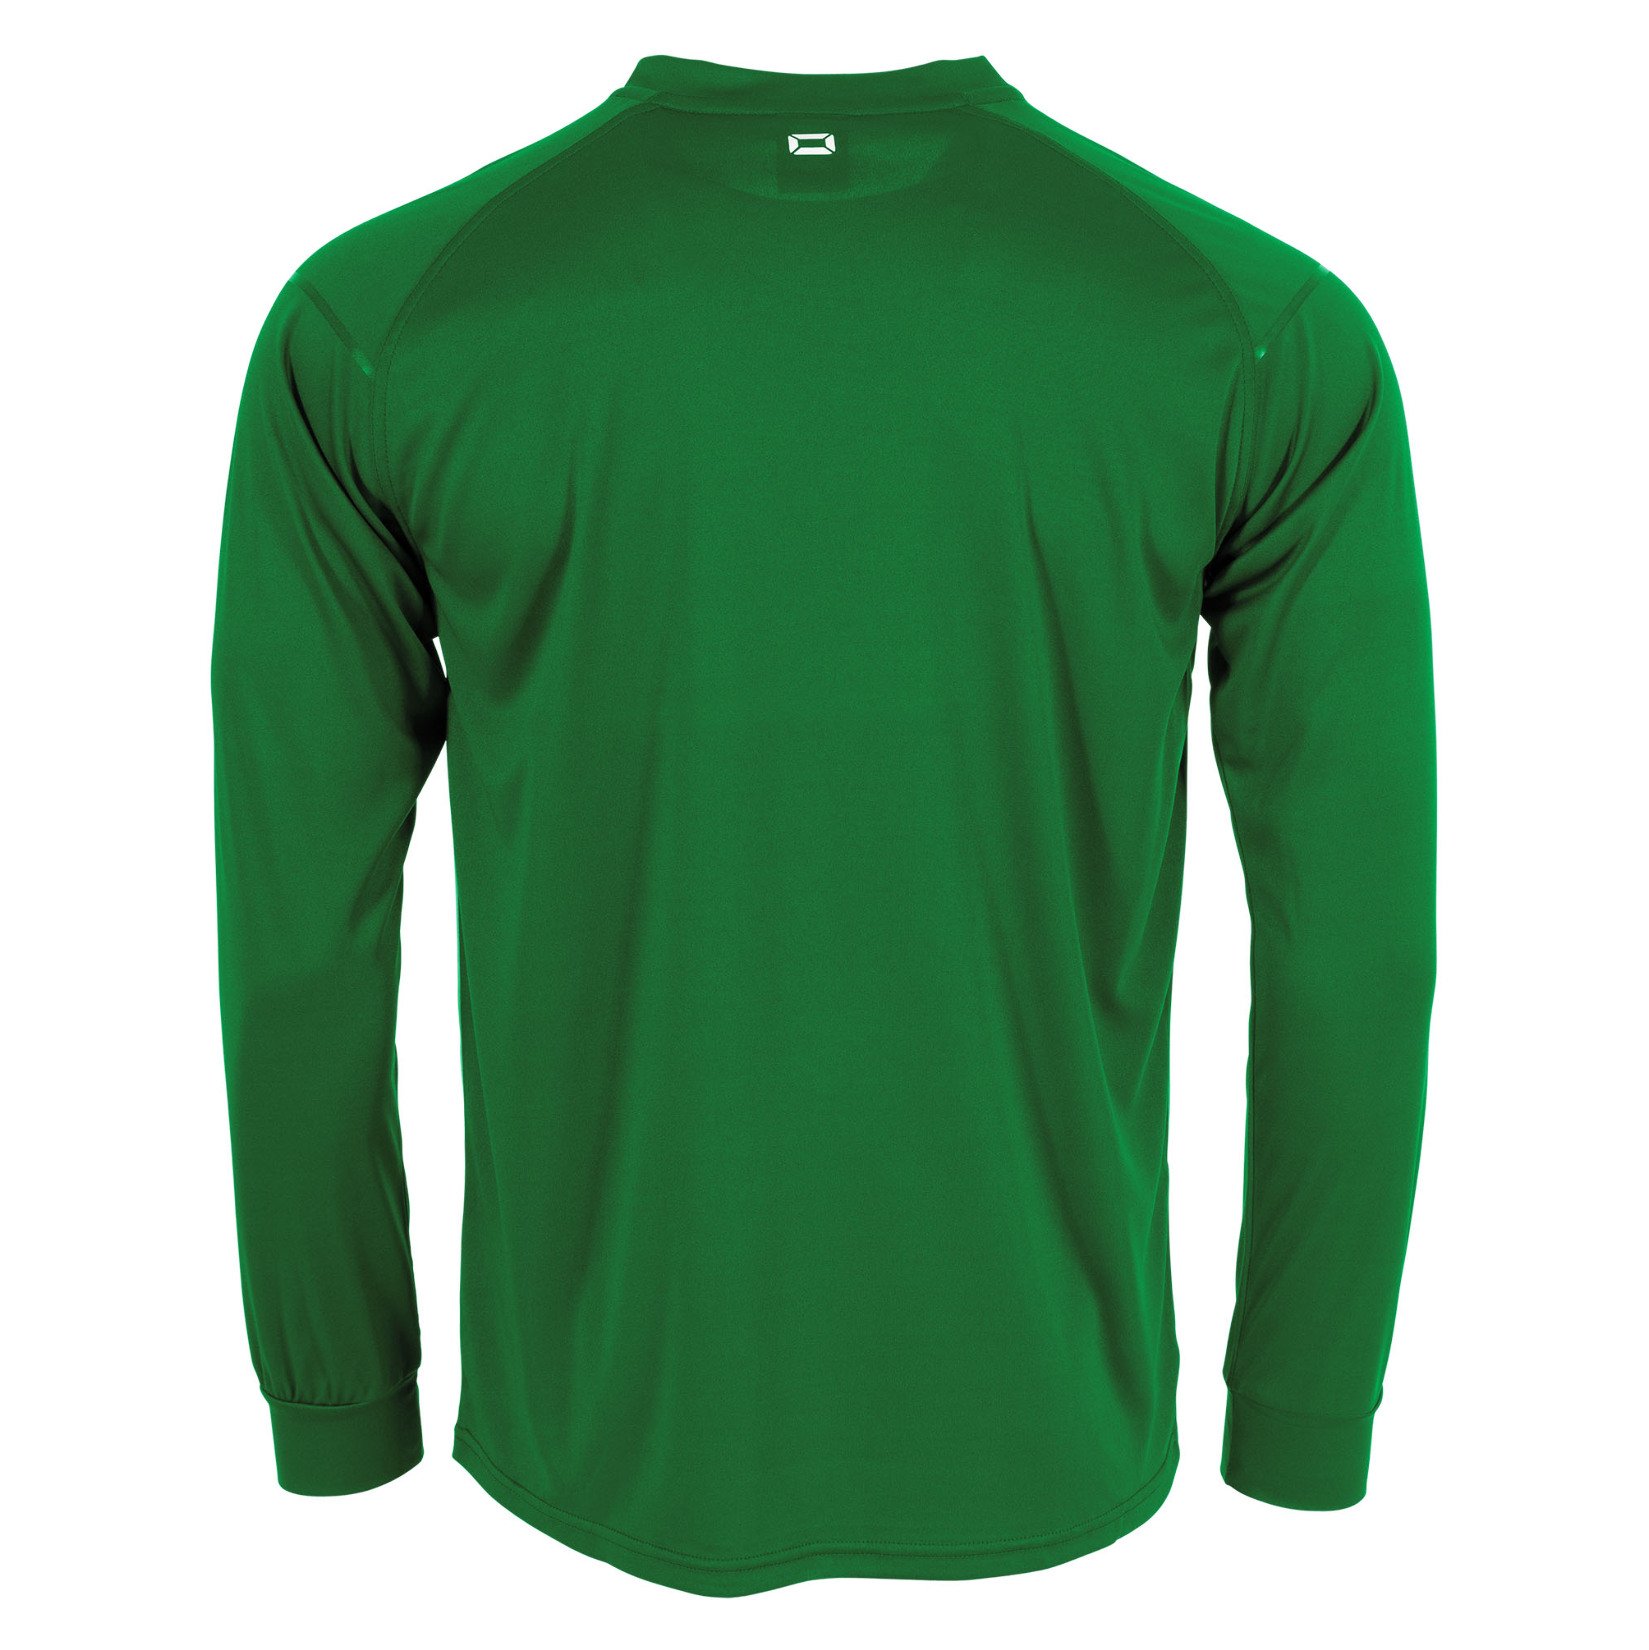 Stanno First Long Sleeve Jersey